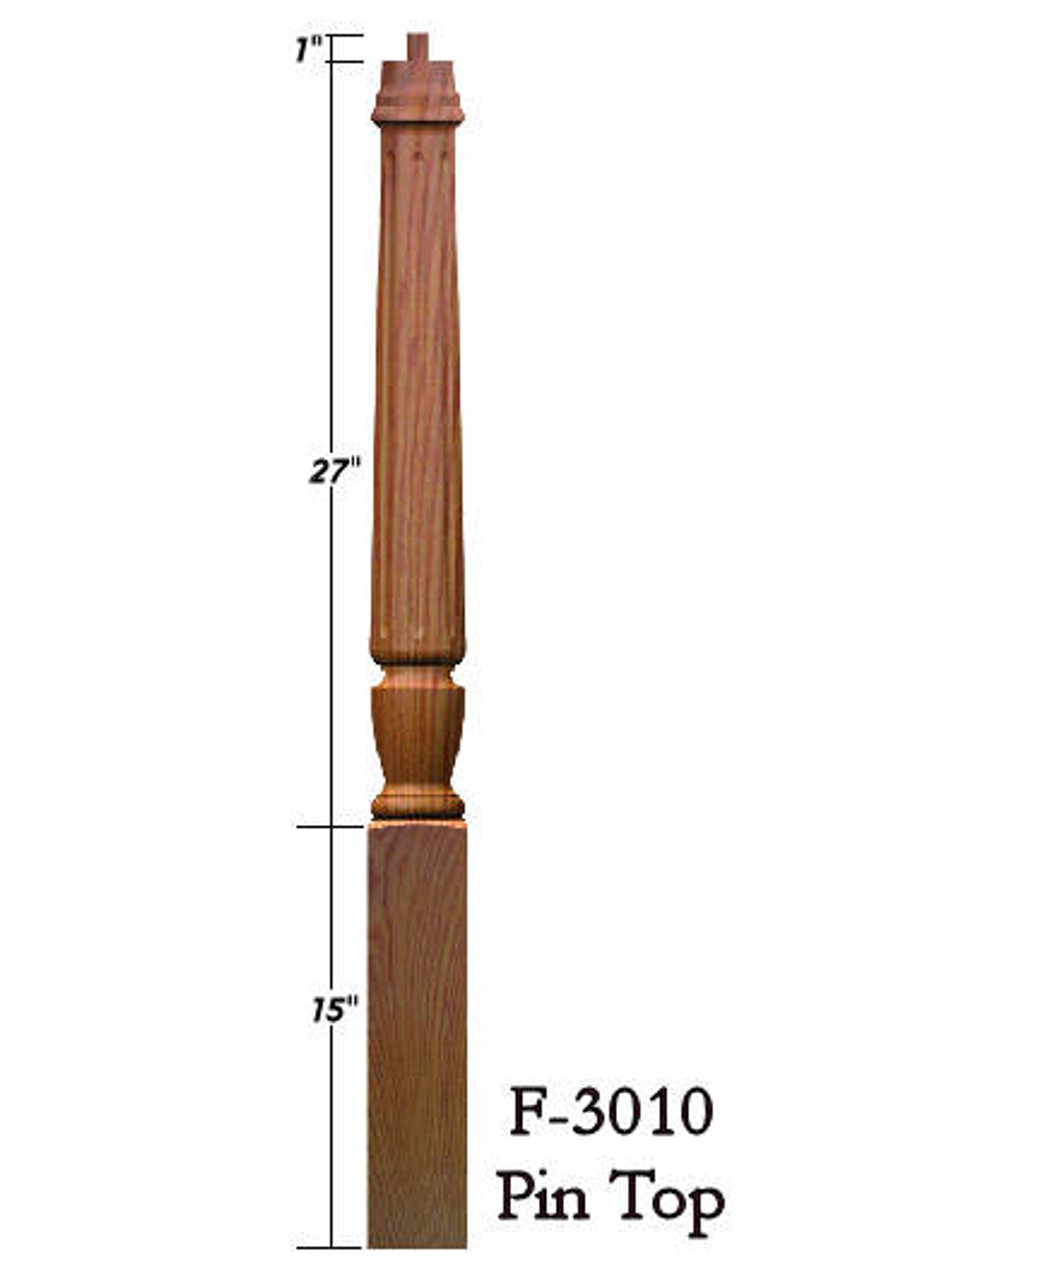 F-3010 Fluted 43" Pin Top Starting Newel Post